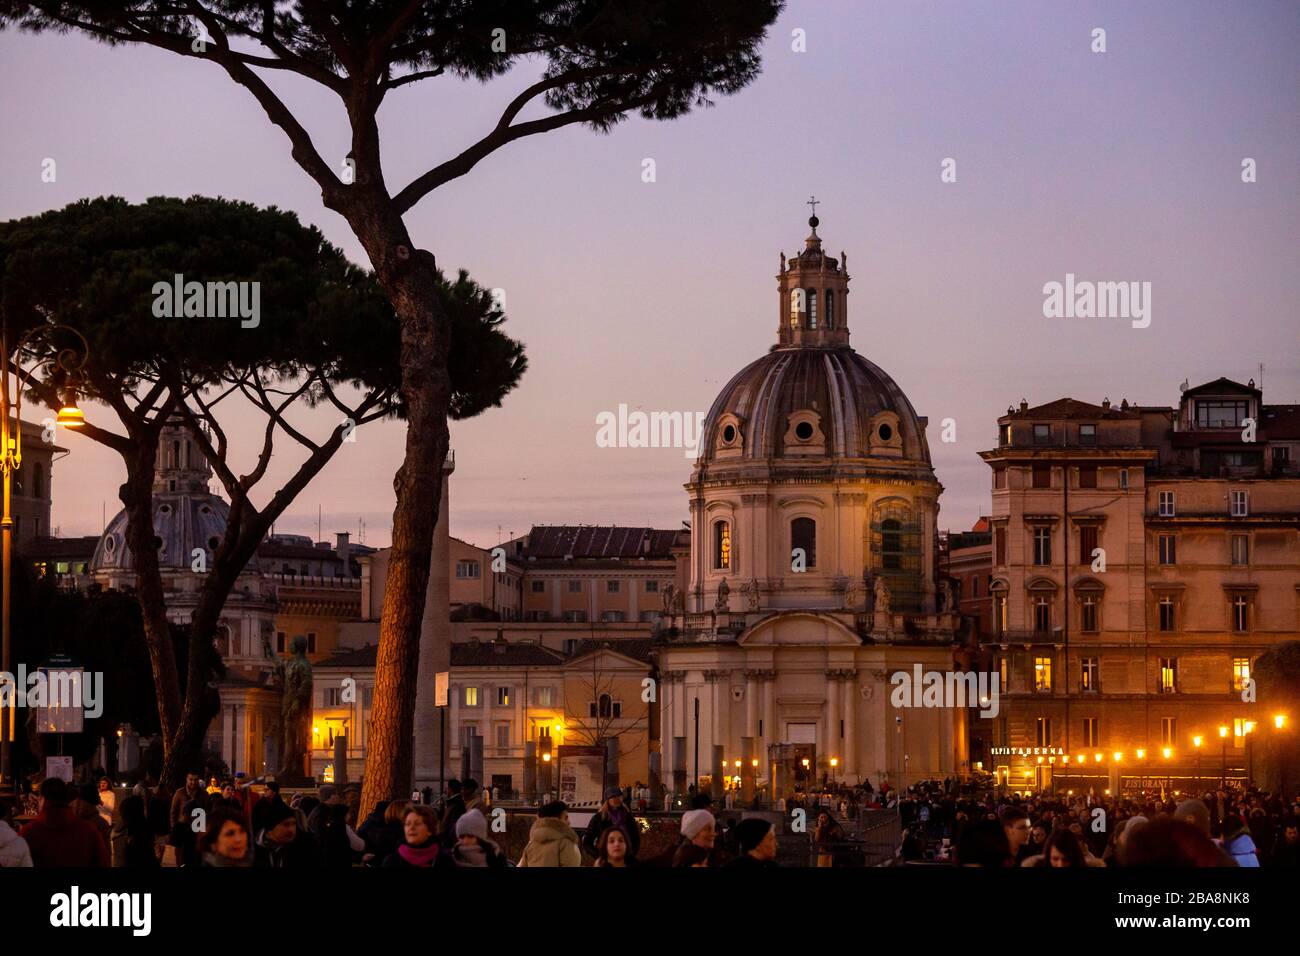 Tourists visiting sights in Rome at night Stock Photo